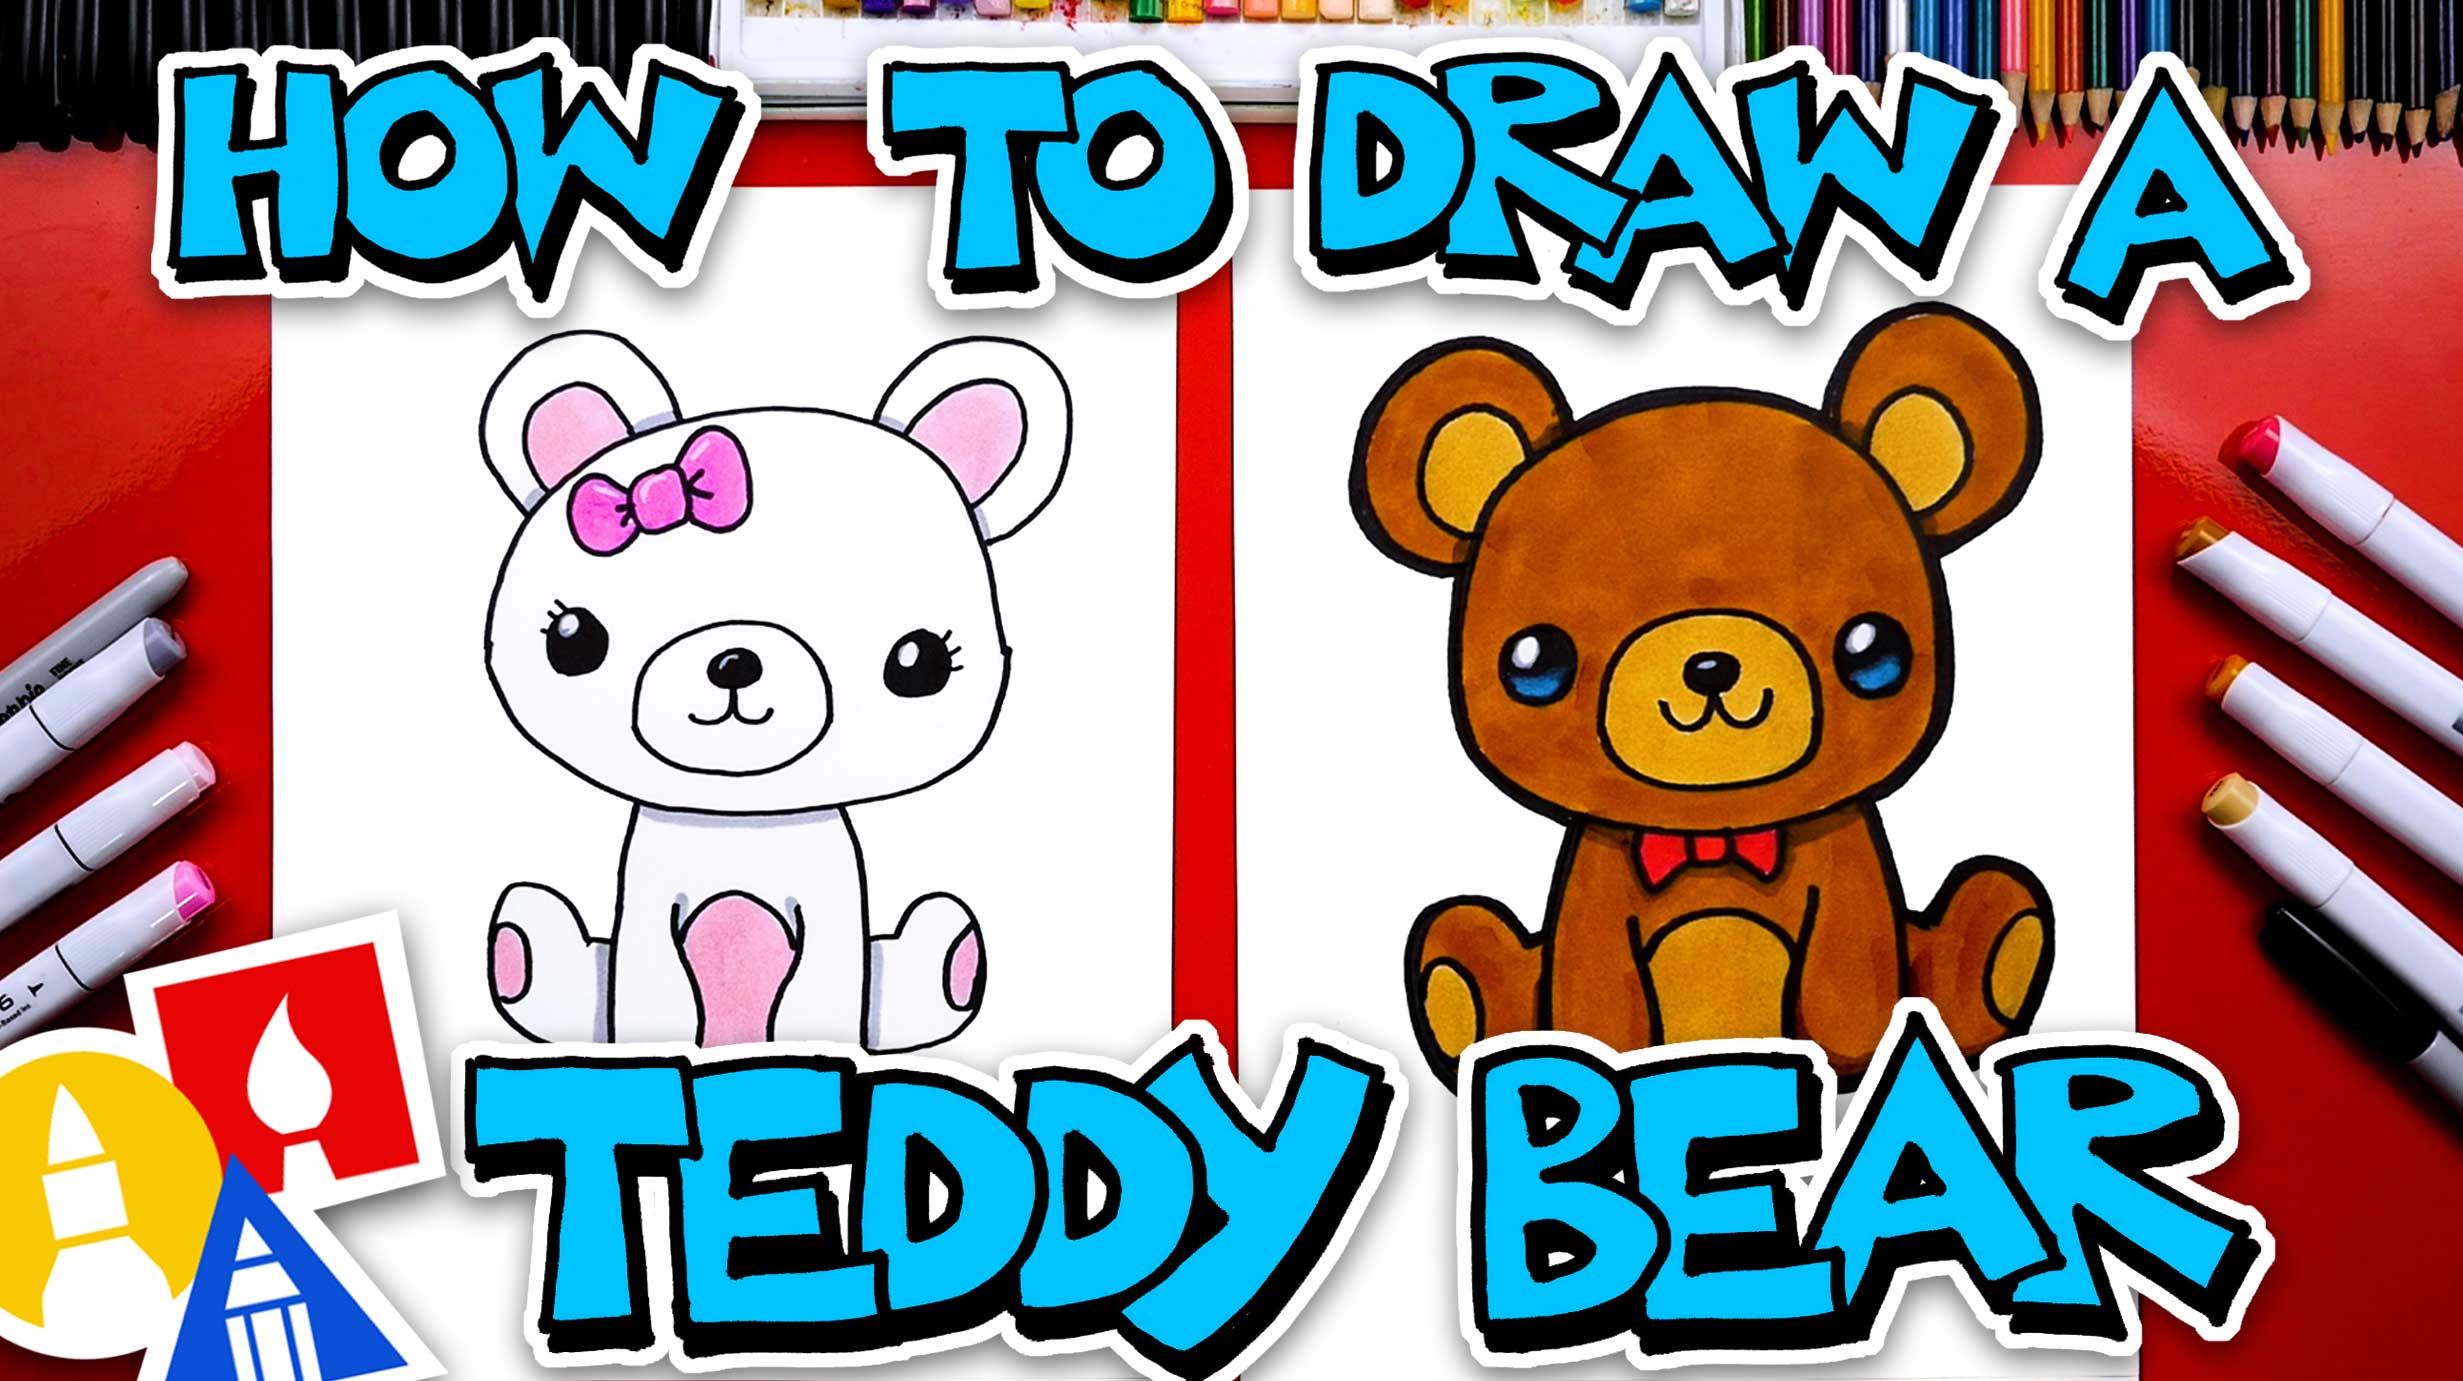 How To Draw Cute Teddy Bears:Amazon.com:Appstore for Android